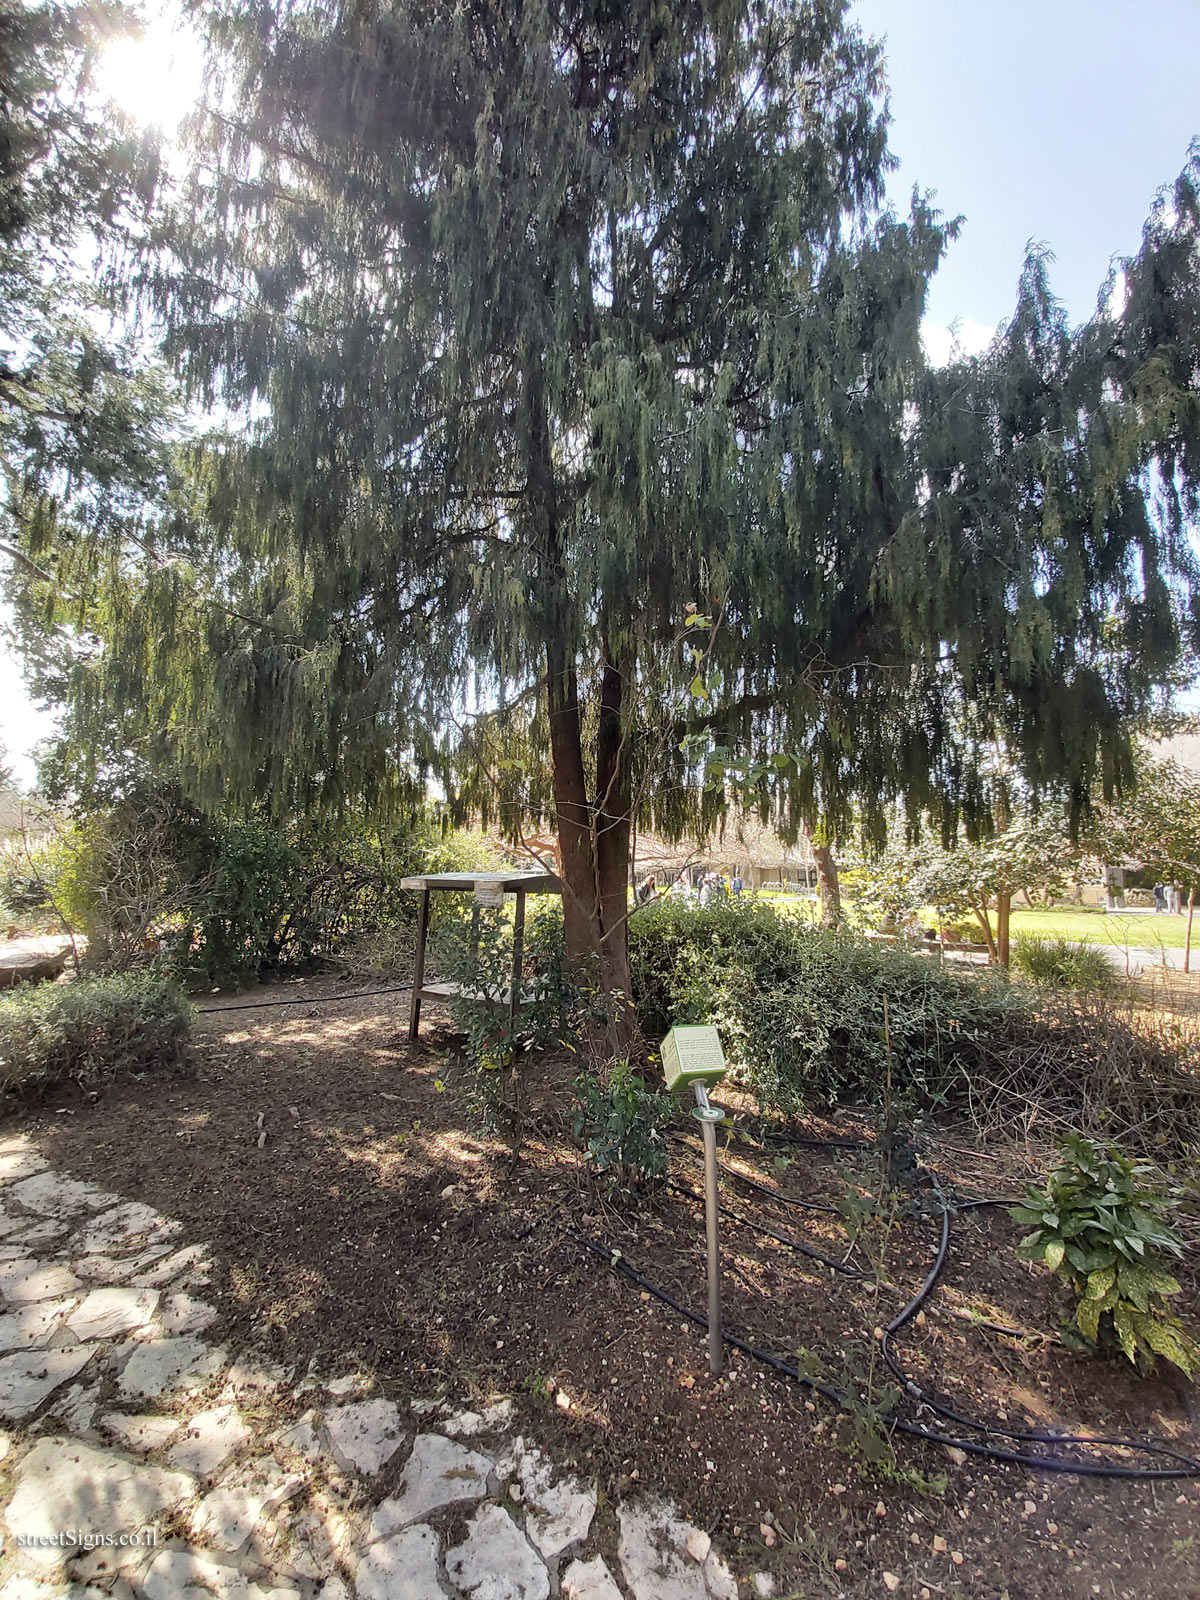 The Hebrew University of Jerusalem - Discovery Tree Walk - Weeping Cypress - Safra Campus